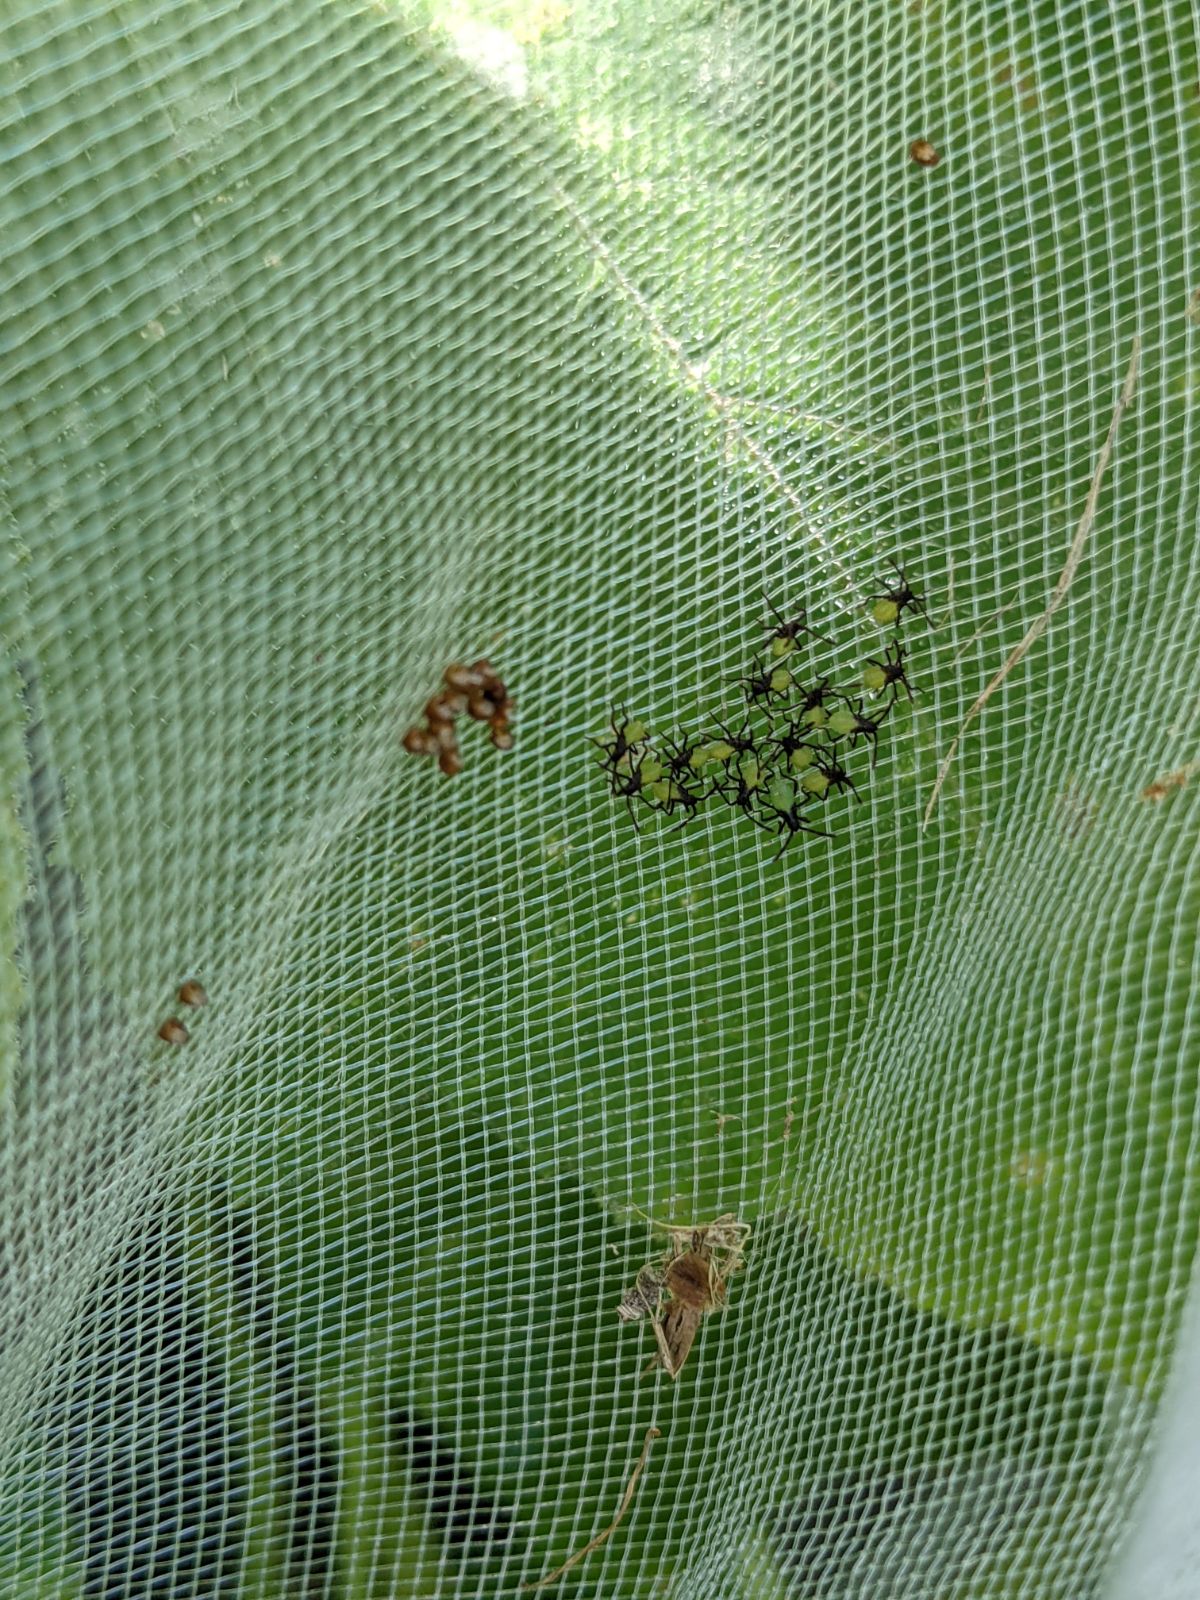 Newly hatched squash bugs congregating inside insect netting designed to prevent infestation.